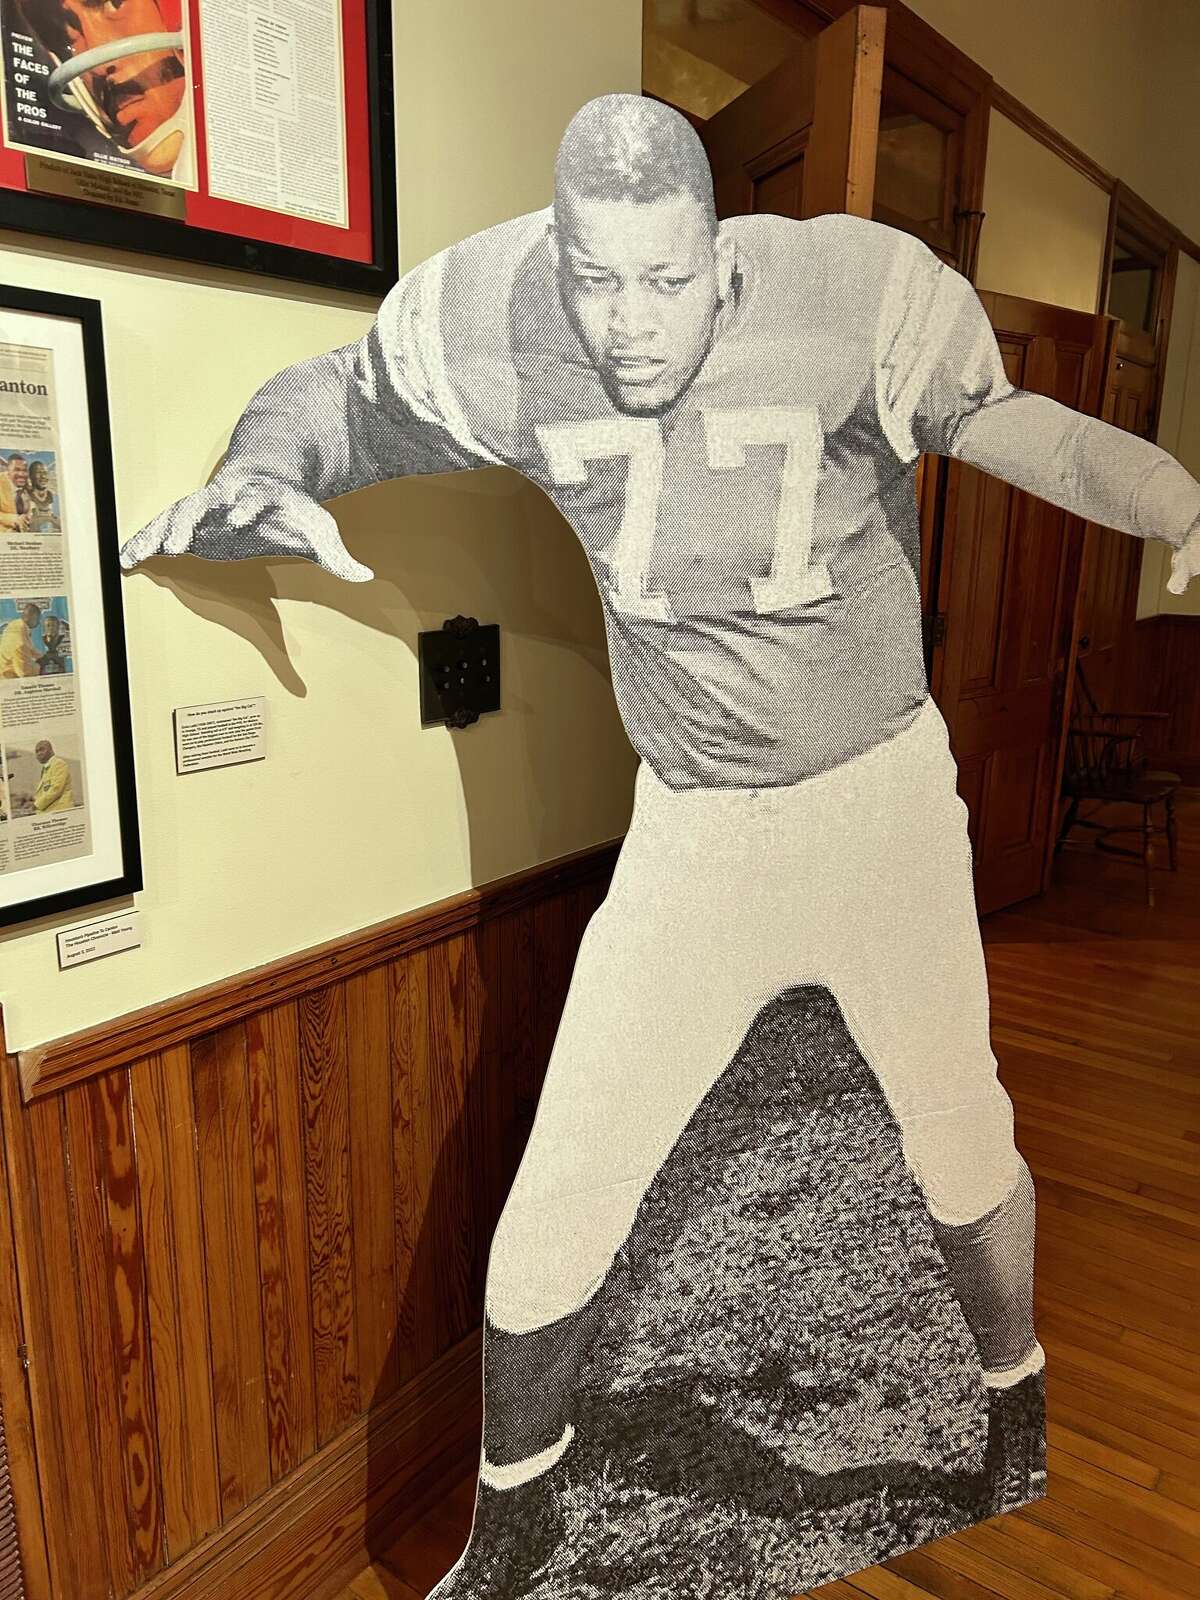 An Ernie Ladd cutout greets visitors at the "Thursday Night Lights" exhibit at the Bryan Museum